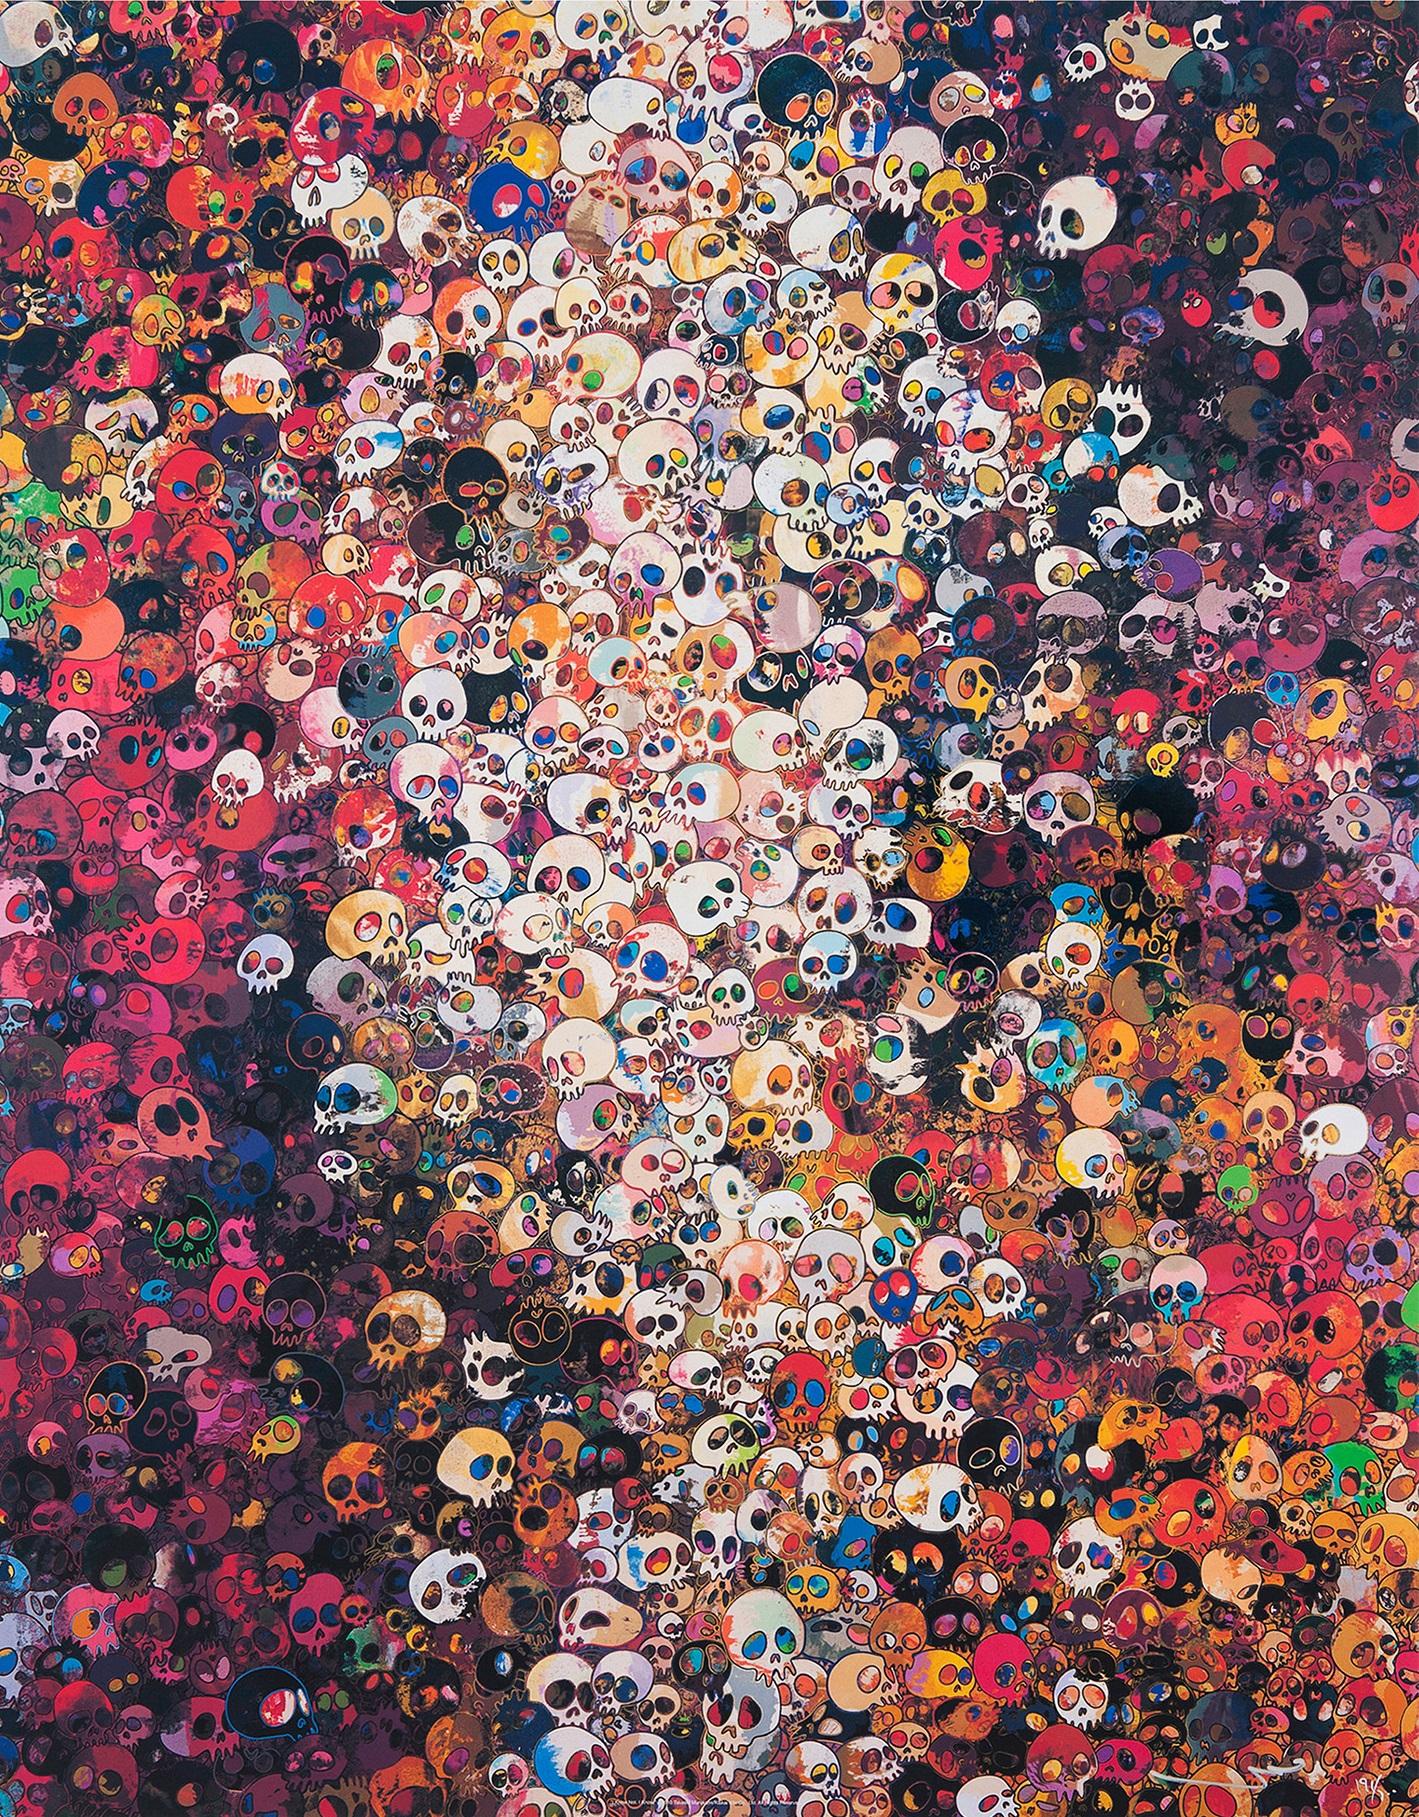 Takashi Murakami Figurative Print -  I know Not. I know. Limited Edition (print) by Murakami signed, numbered